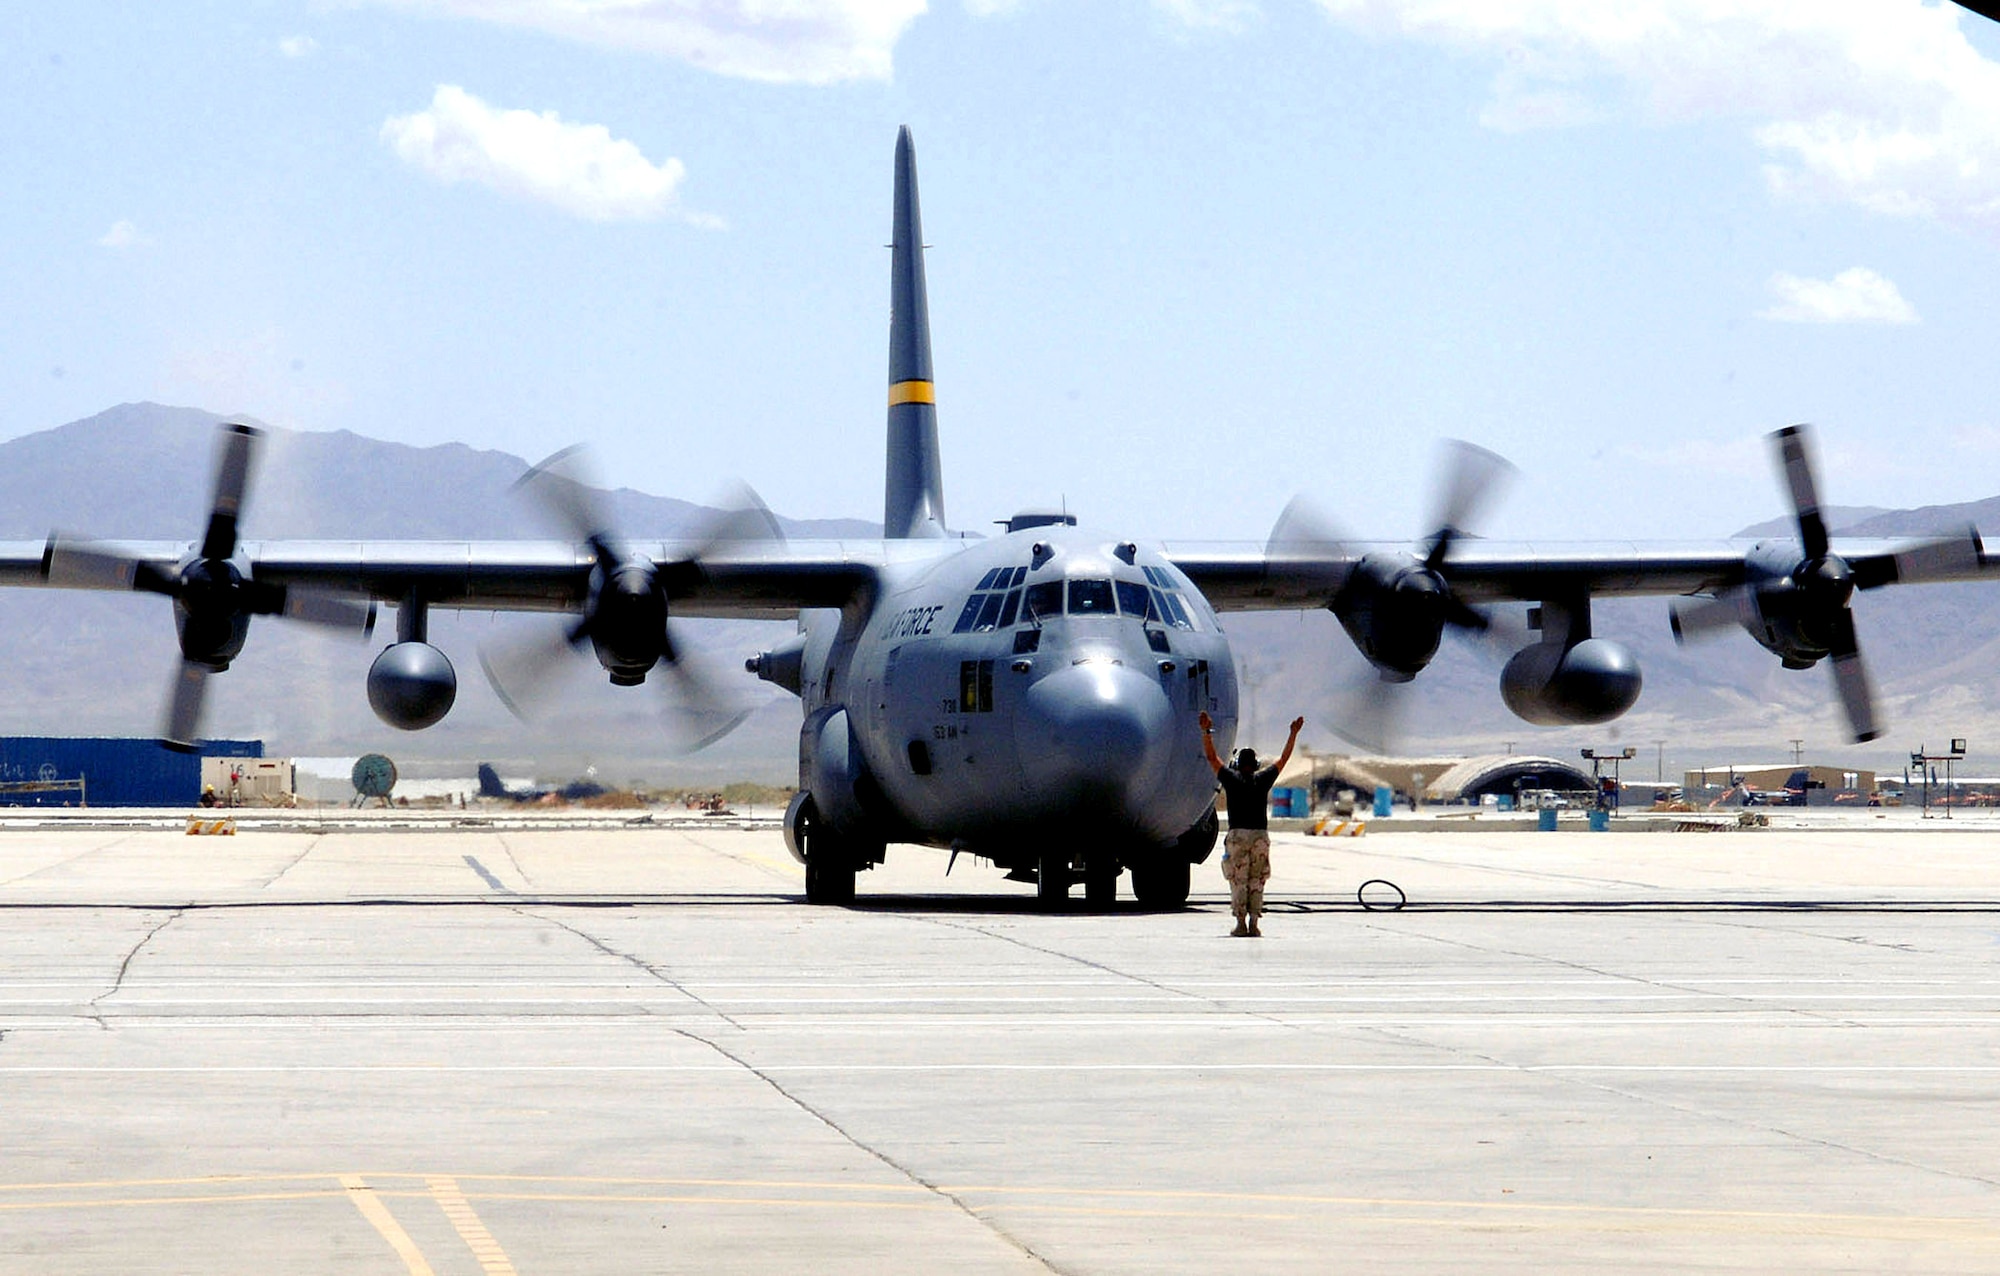 A C-130 Hercules crew chief from the 455th Expeditionary Maintenance Group marshals a Hercules to its parking spot on the flightline at Bagram Airfield, Afghanistan.  C-130s provide intra-theater airlift support to sustain operations throughout Southwest Asia.  (U.S. Air Force photo/Staff Sgt. Craig Seals)